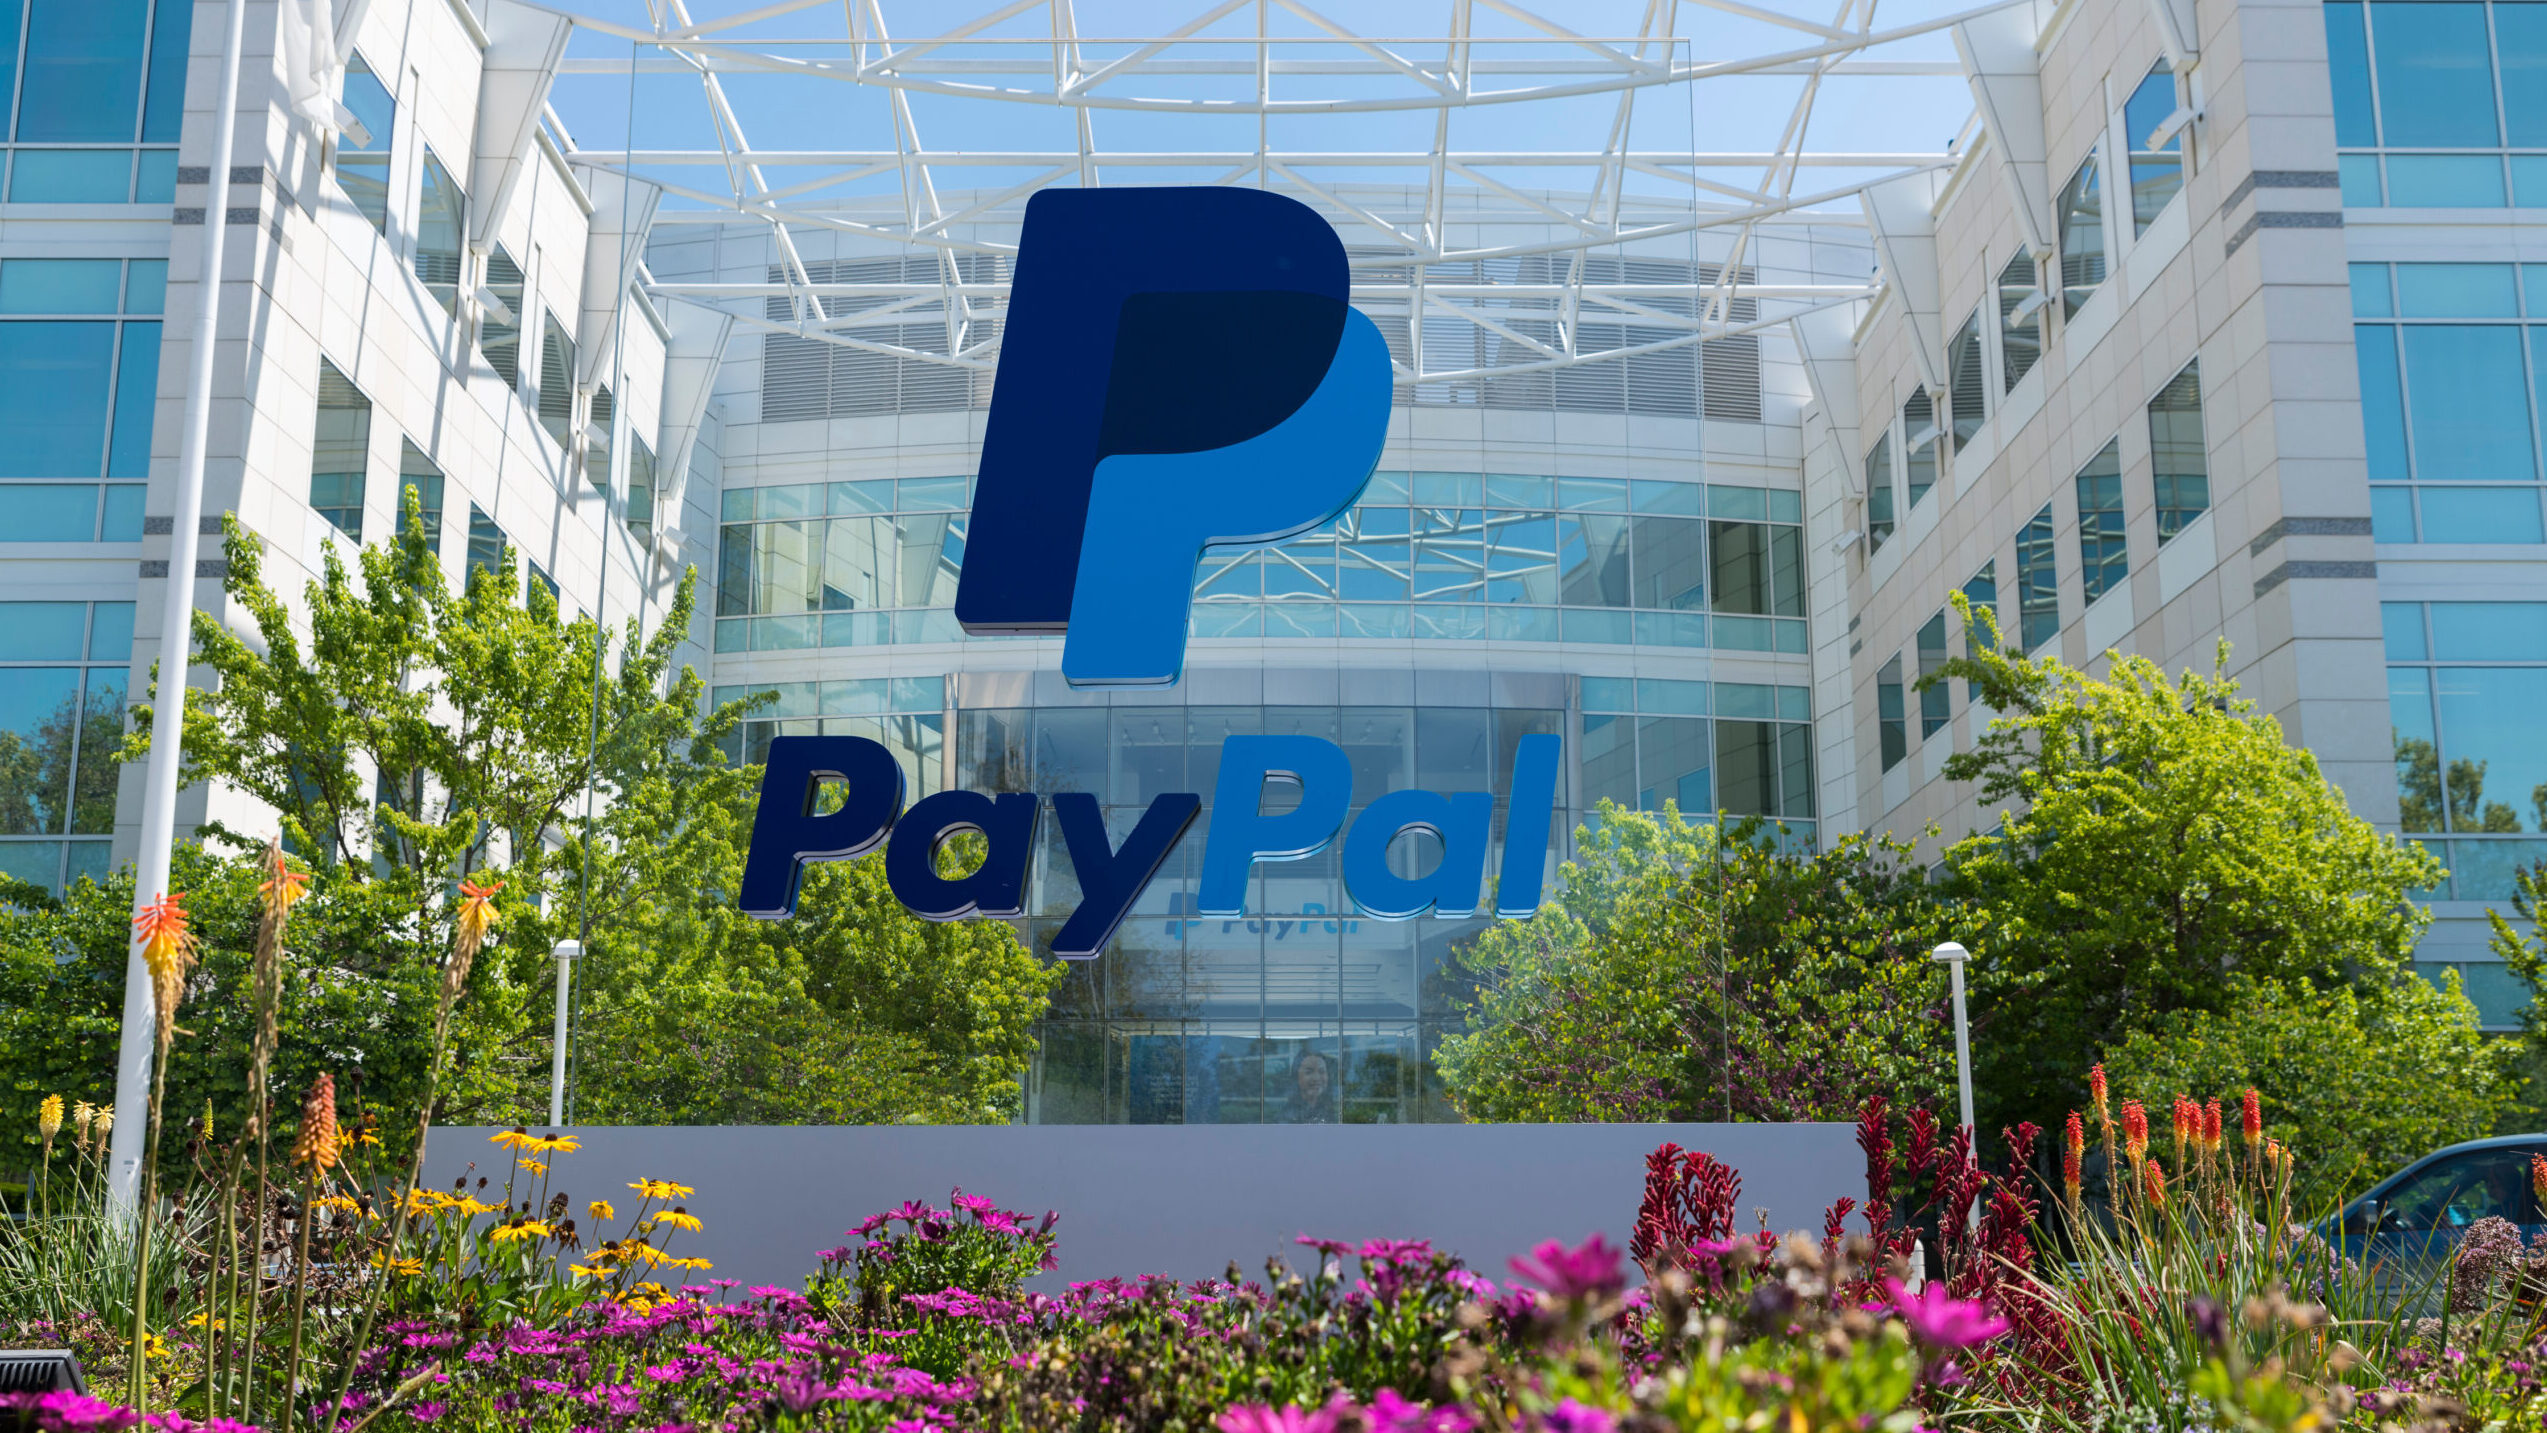 PayPal leads Mobile Wallet race| FinTech giant Klarna raises $639m at $45.6B valuation | State Street wades into digital asset space with new division